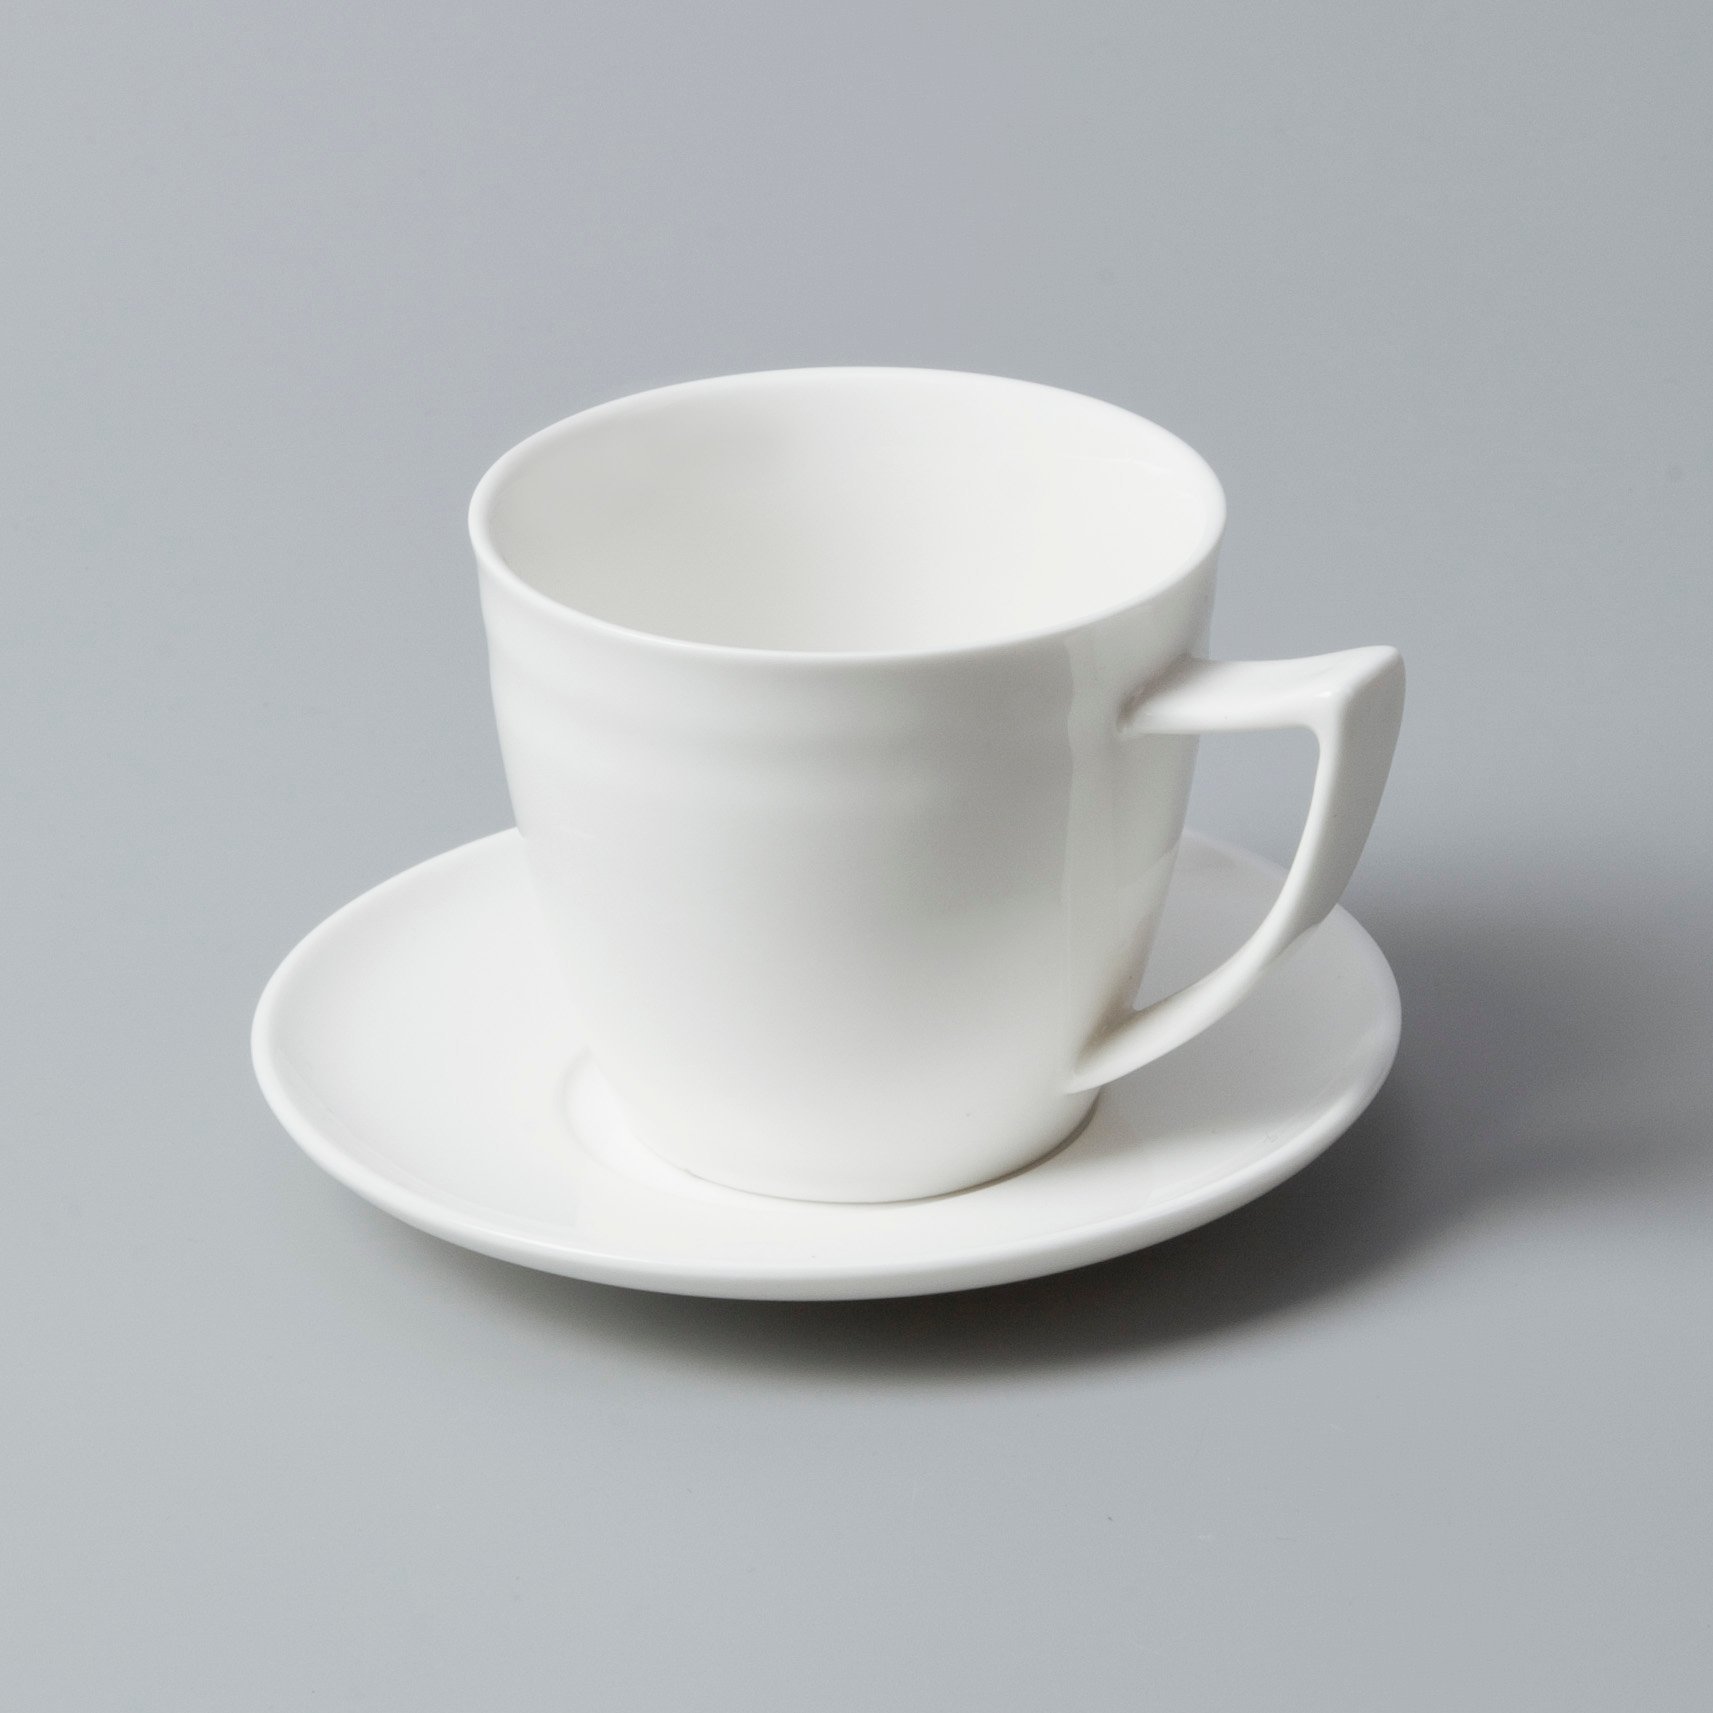 sample quality china dinnerware from China for dinner Two Eight